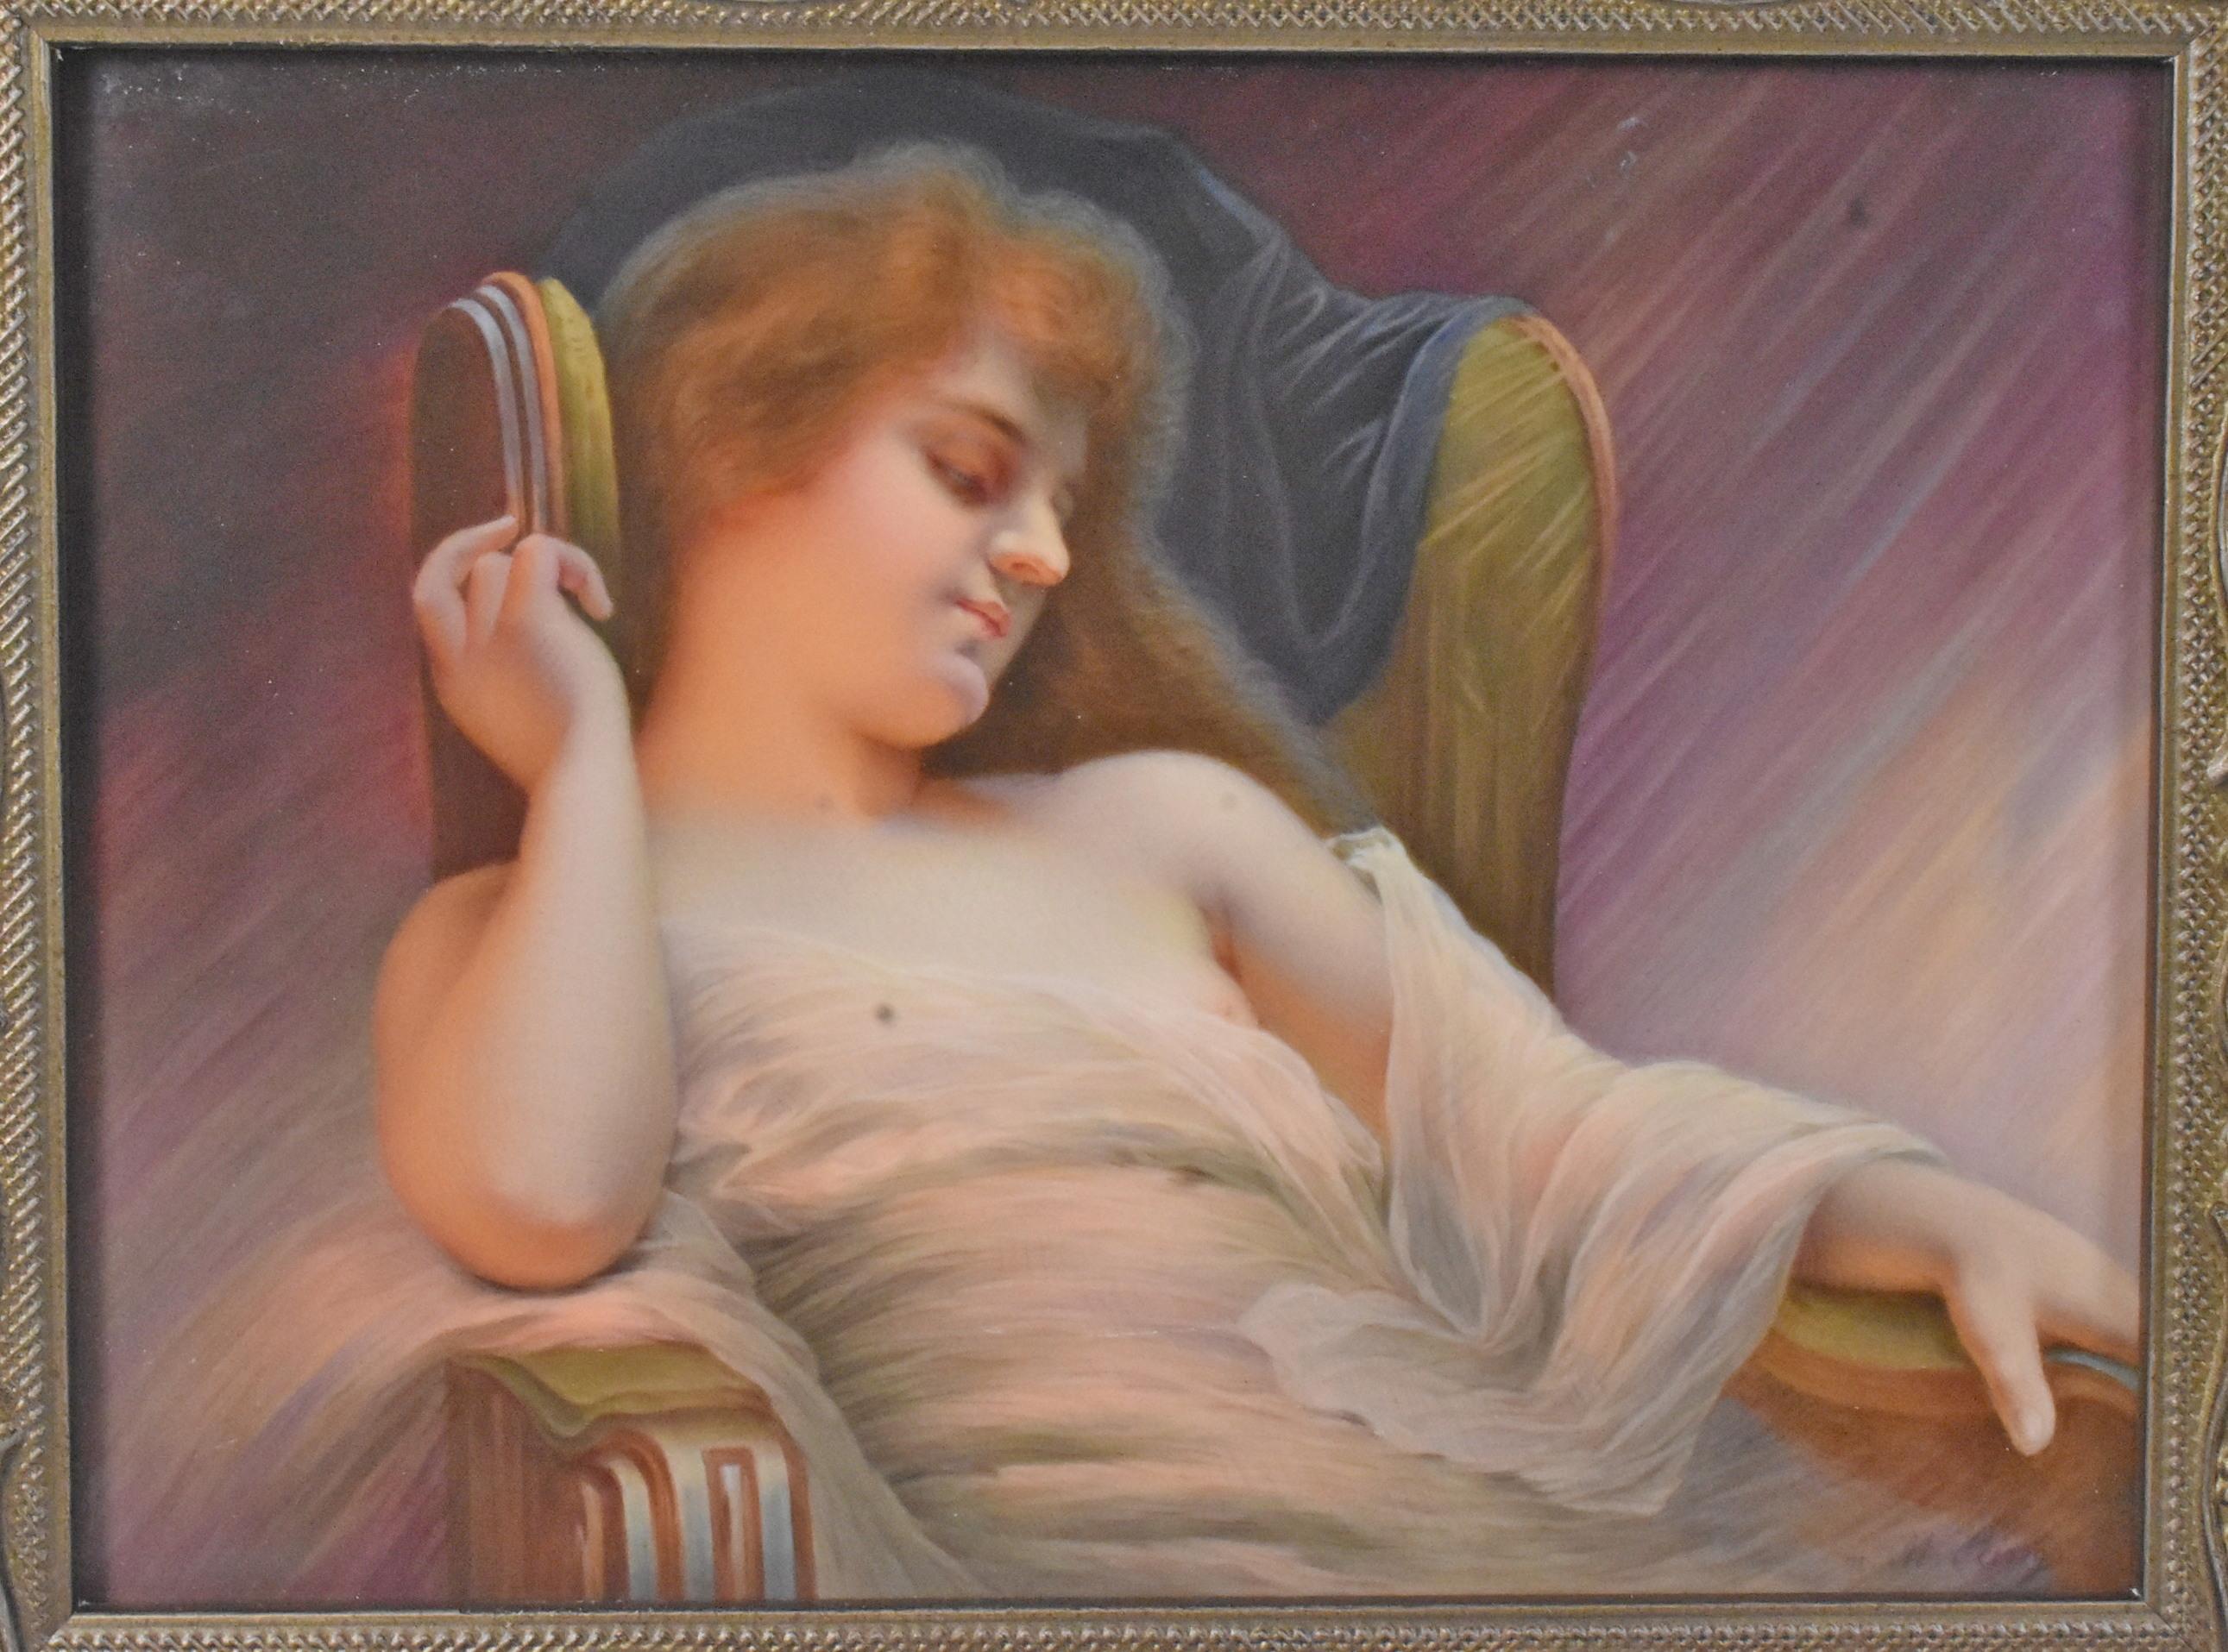 K.P.M Painting on Porcelain signed M. Ring and Am Ramin, circa 1837-1844, Mid-19th Century. Red headed woman reclining in chair, mauve and purple tones, the pink undertones are the true color. Impressed on back K.P.M and scipter dating it to